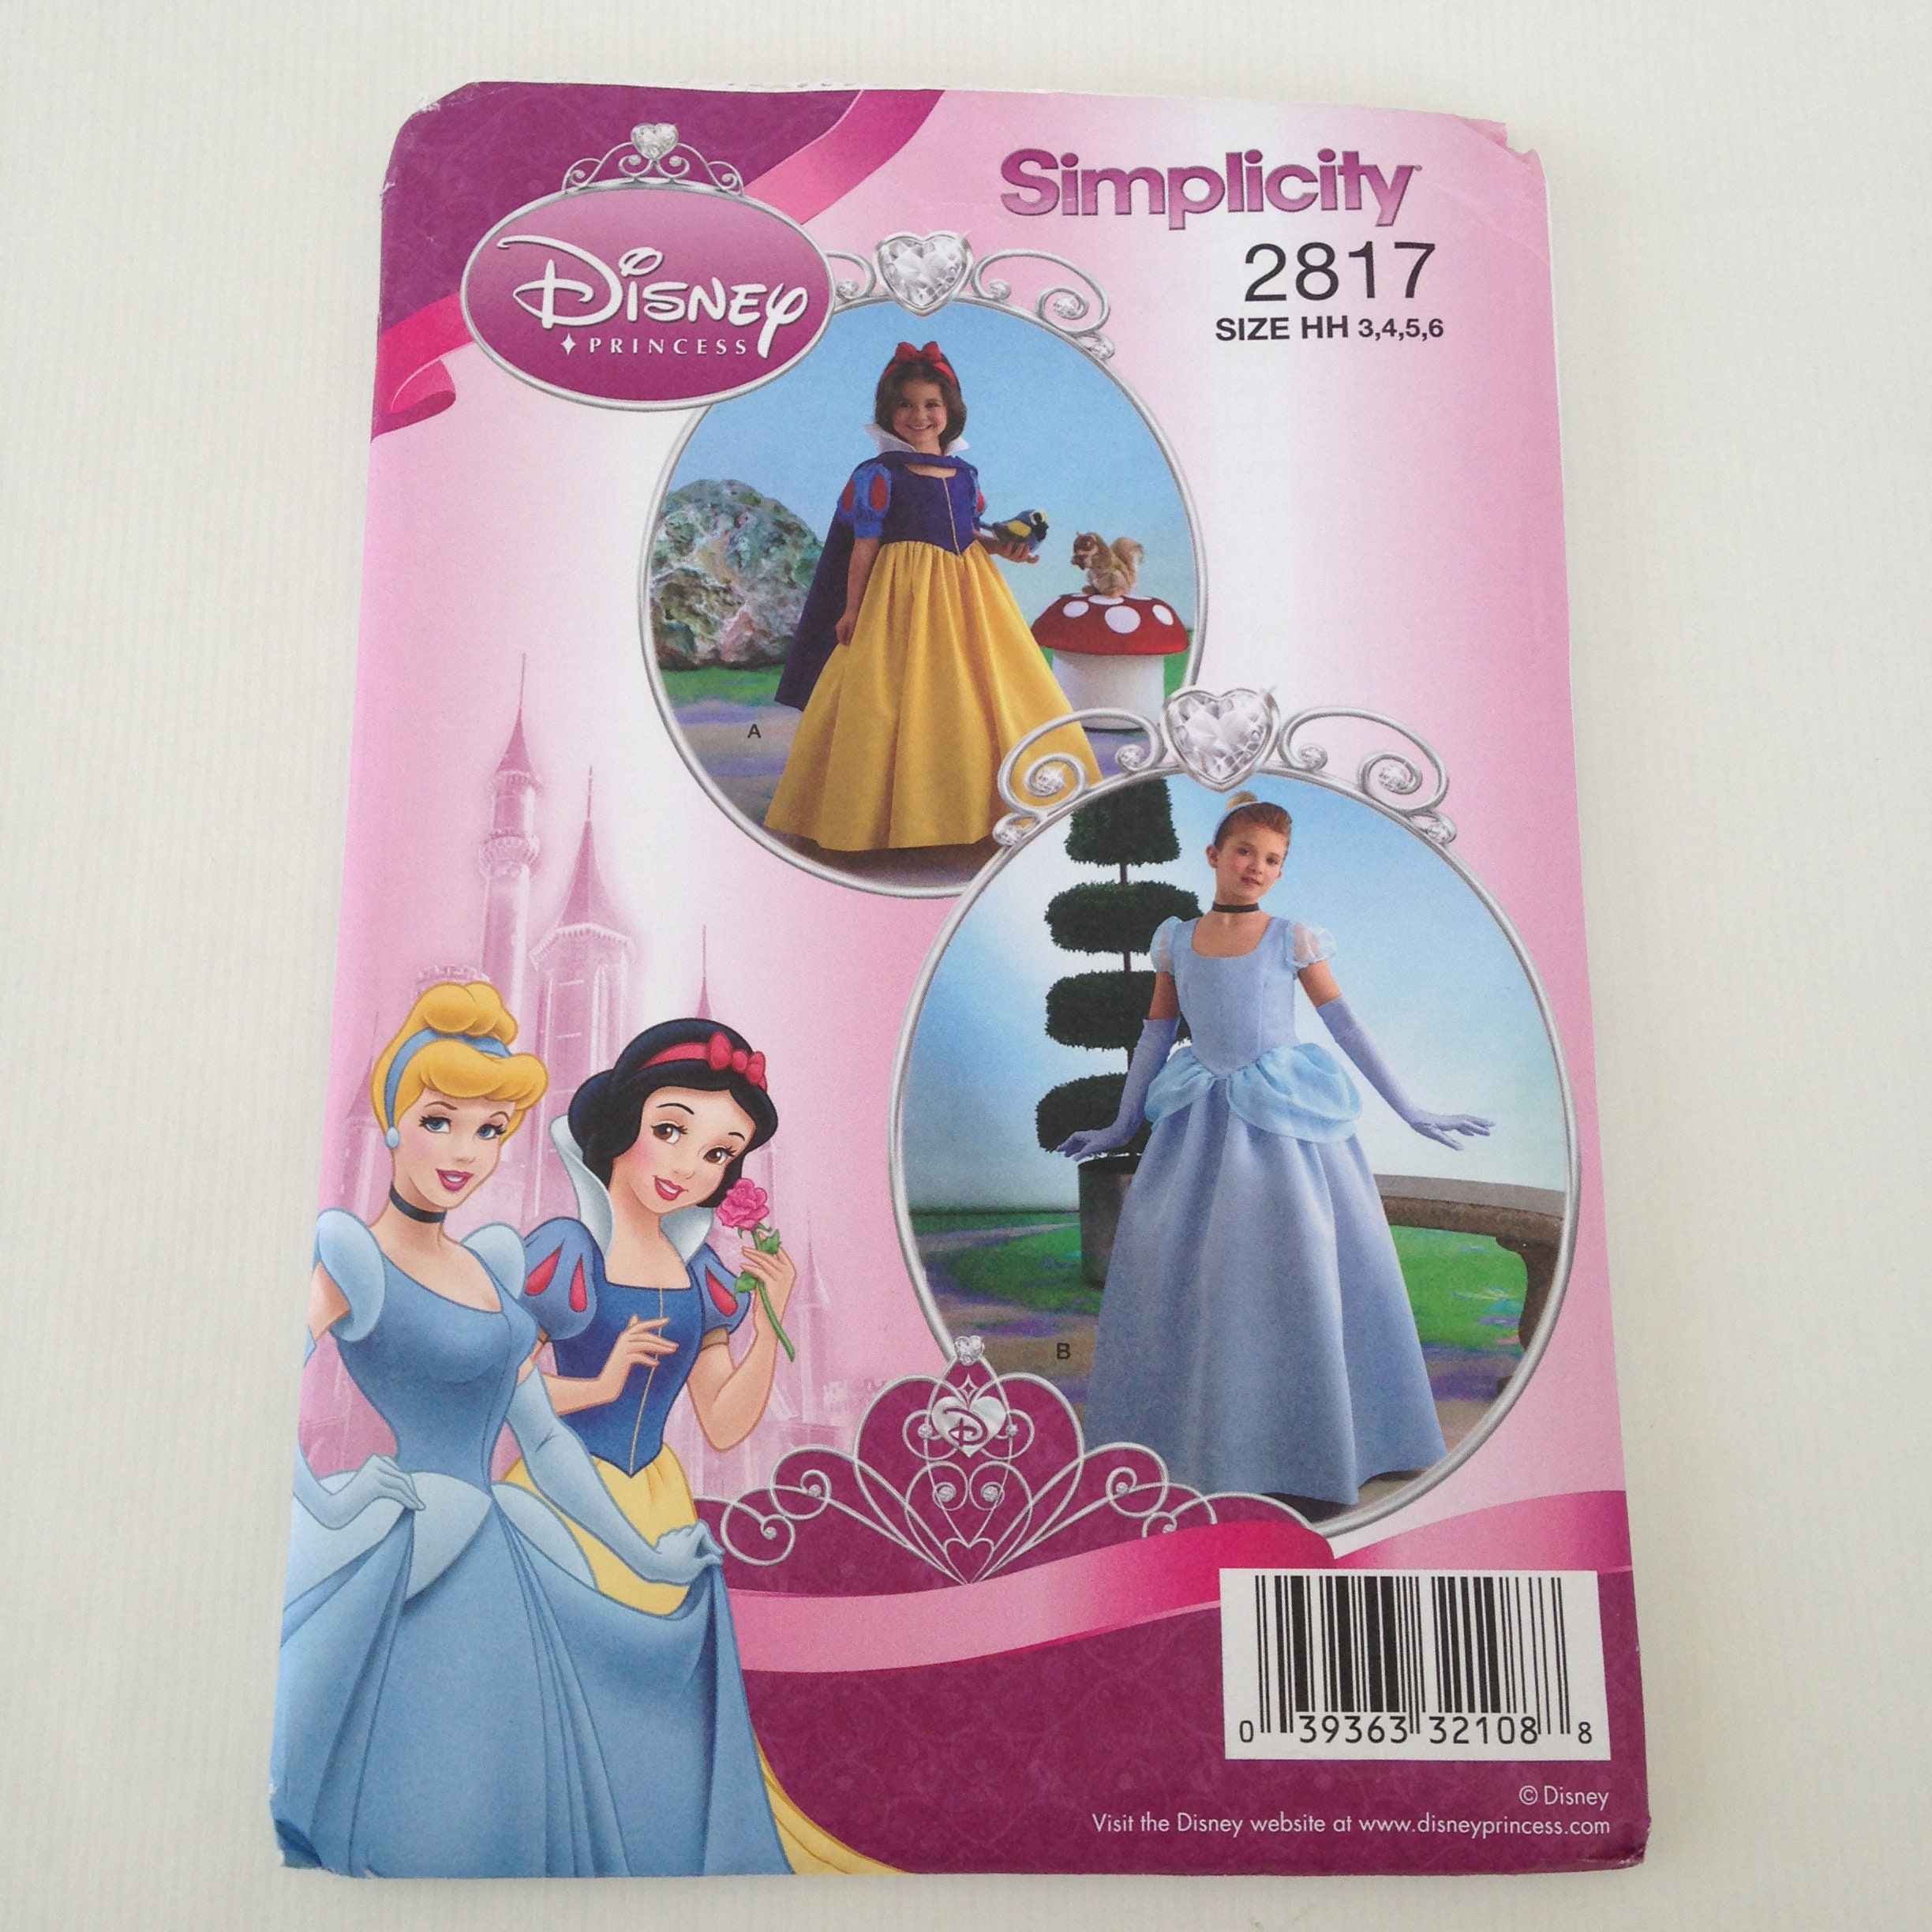 Simplicity 2817    Disney Princess Child's and Girls' Costume     Size HH 3,4,5,6  Sewing Pattern